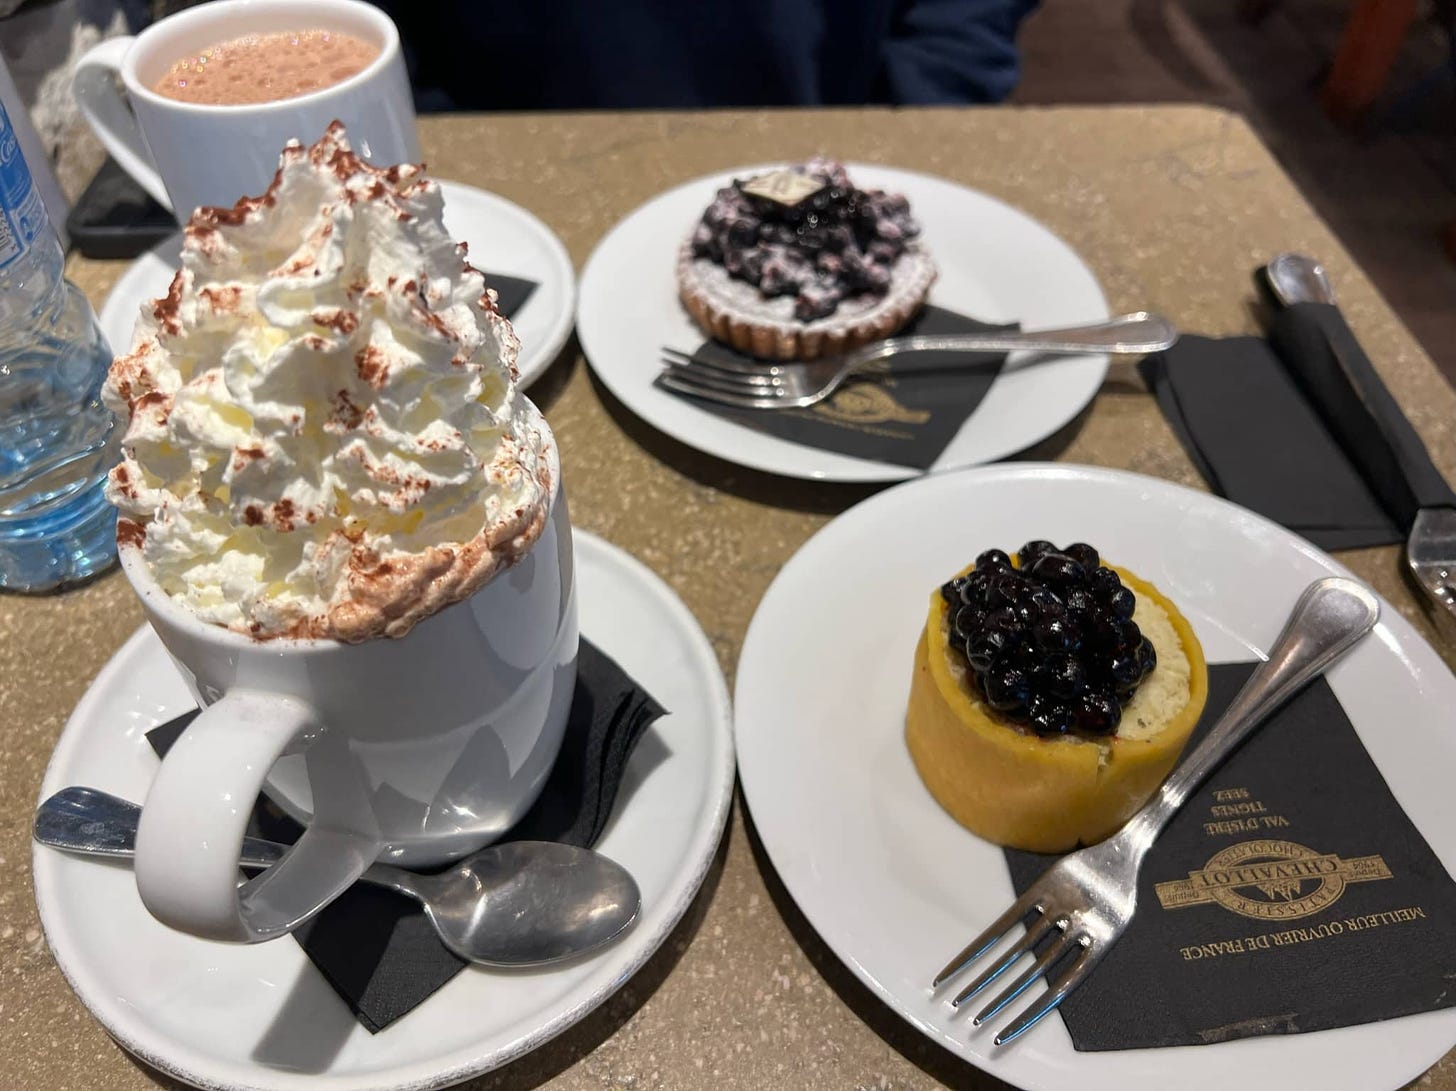 A couple of hot chocolates, a blueberry tarte, and another blueberry dessert I don't remember what it is.